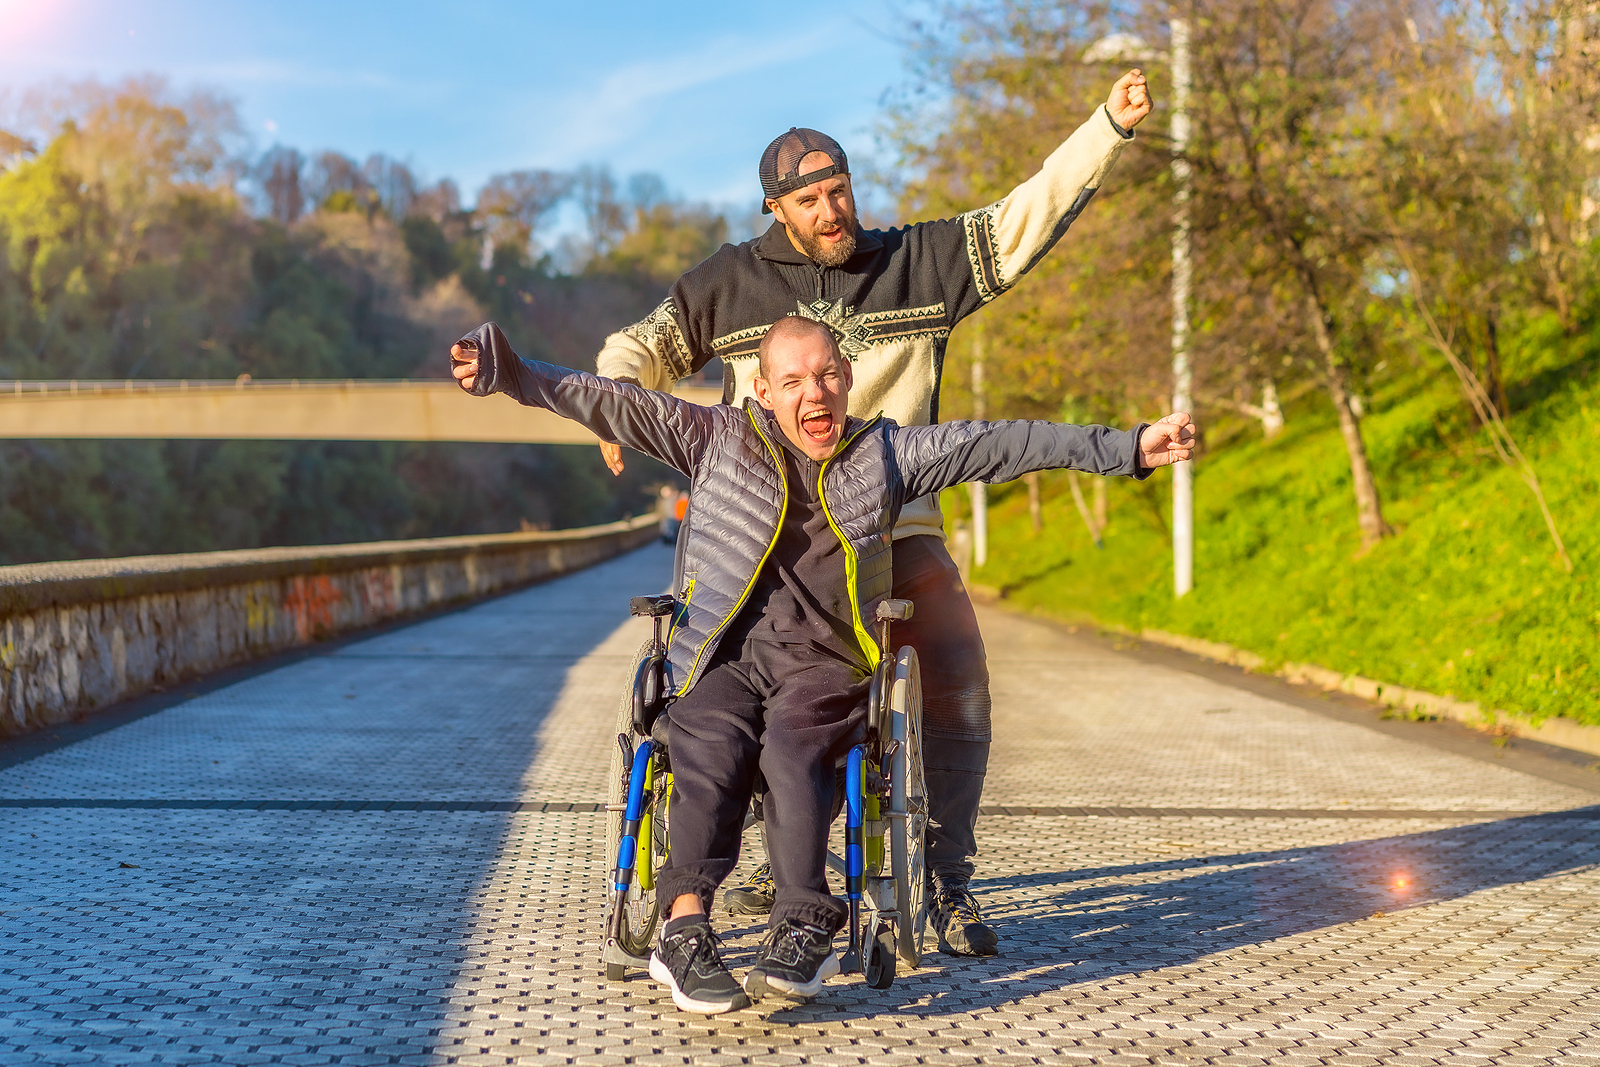 Disabled Person In Wheelchair With Friend Overjoyed, Smiling, En